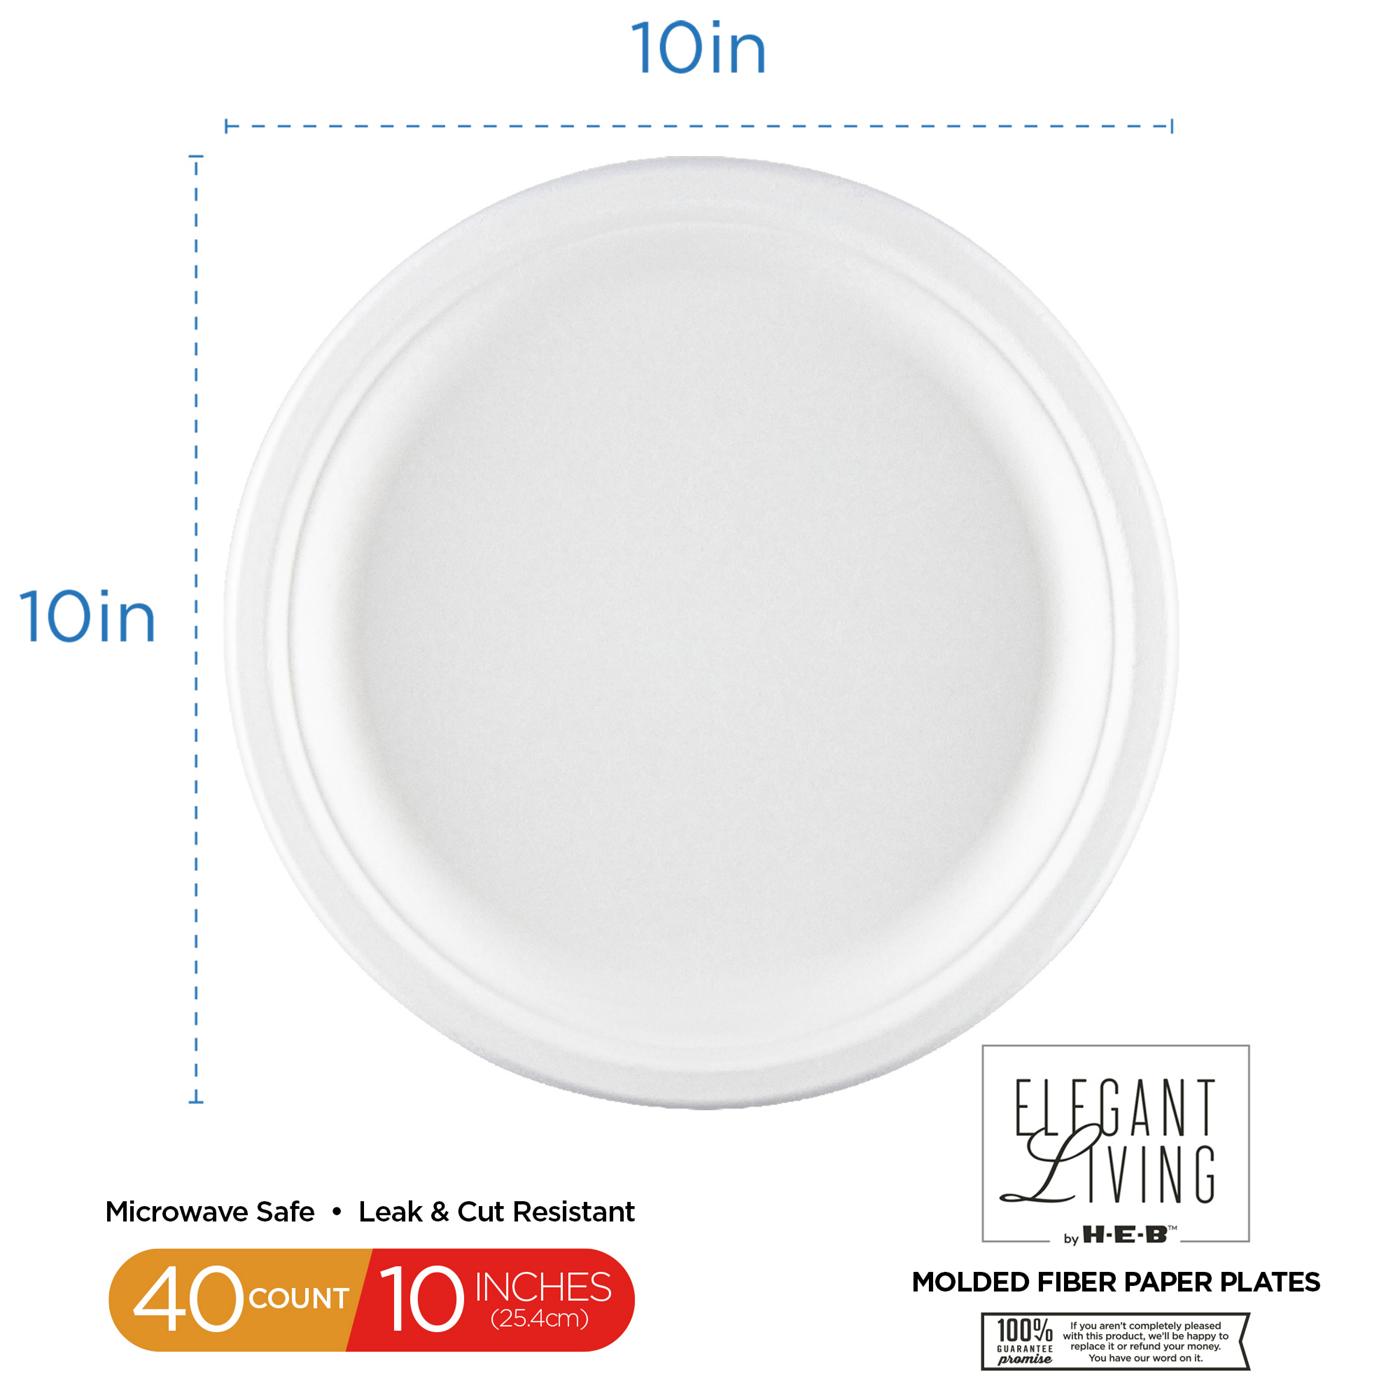 Elegant Living by H-E-B 10" Round Paper Plates; image 4 of 4